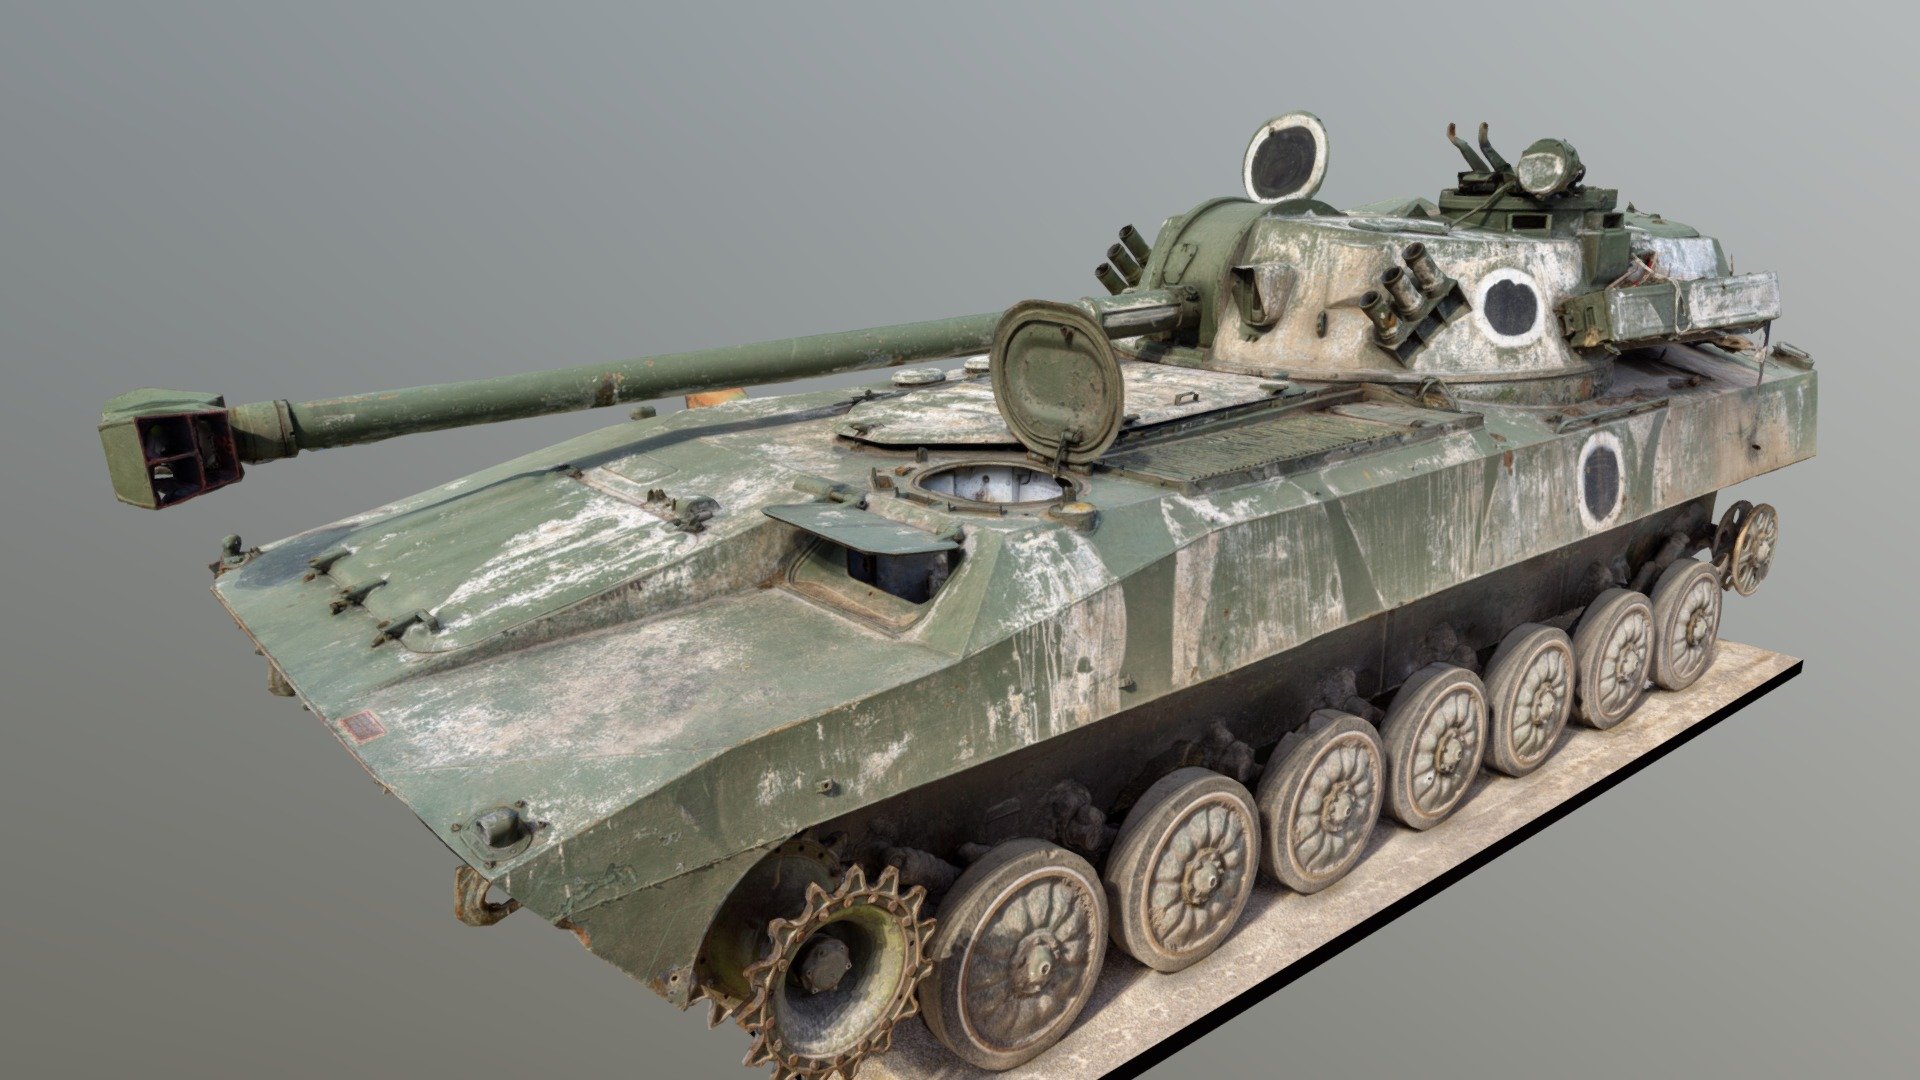 Russian 2S34 destroyed by the Armed Forces of Ukraine during the 2022 invasion of Ukraine.

The unit was showcased during the exhibition at Letná, Prague, Czech republic 3d model